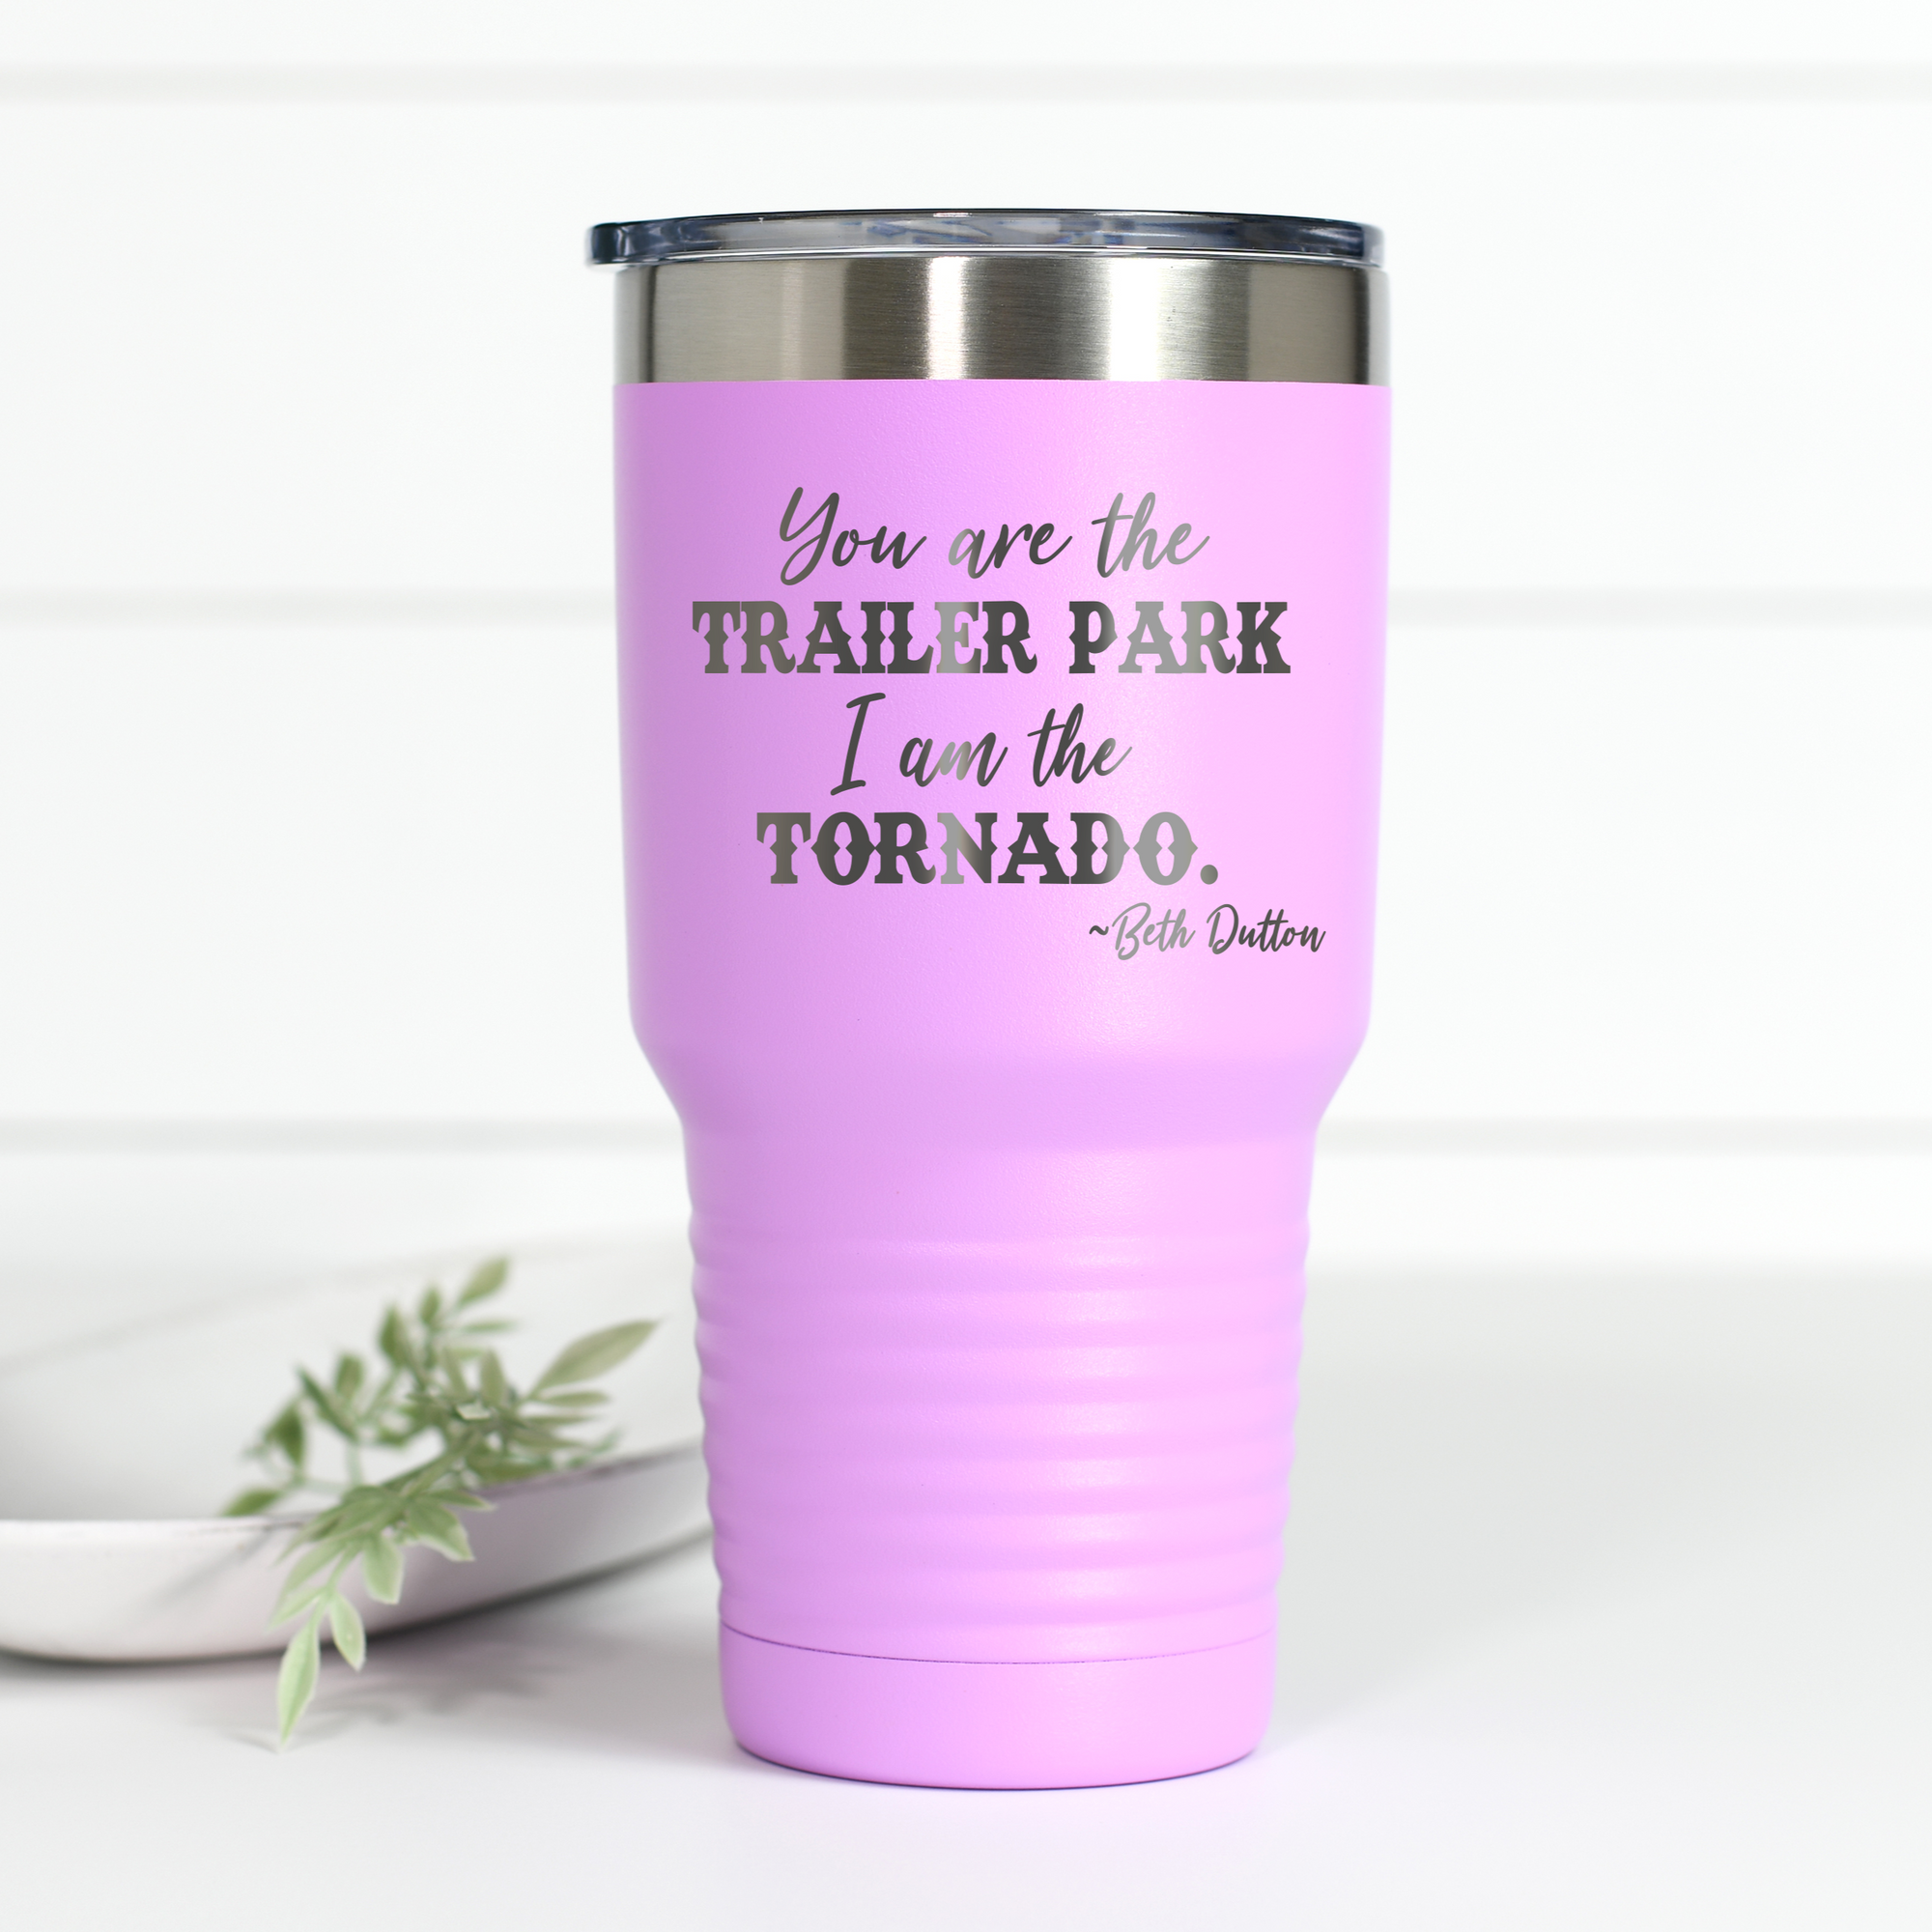 You Are the Trailer Park 30 oz Engraved Tumbler